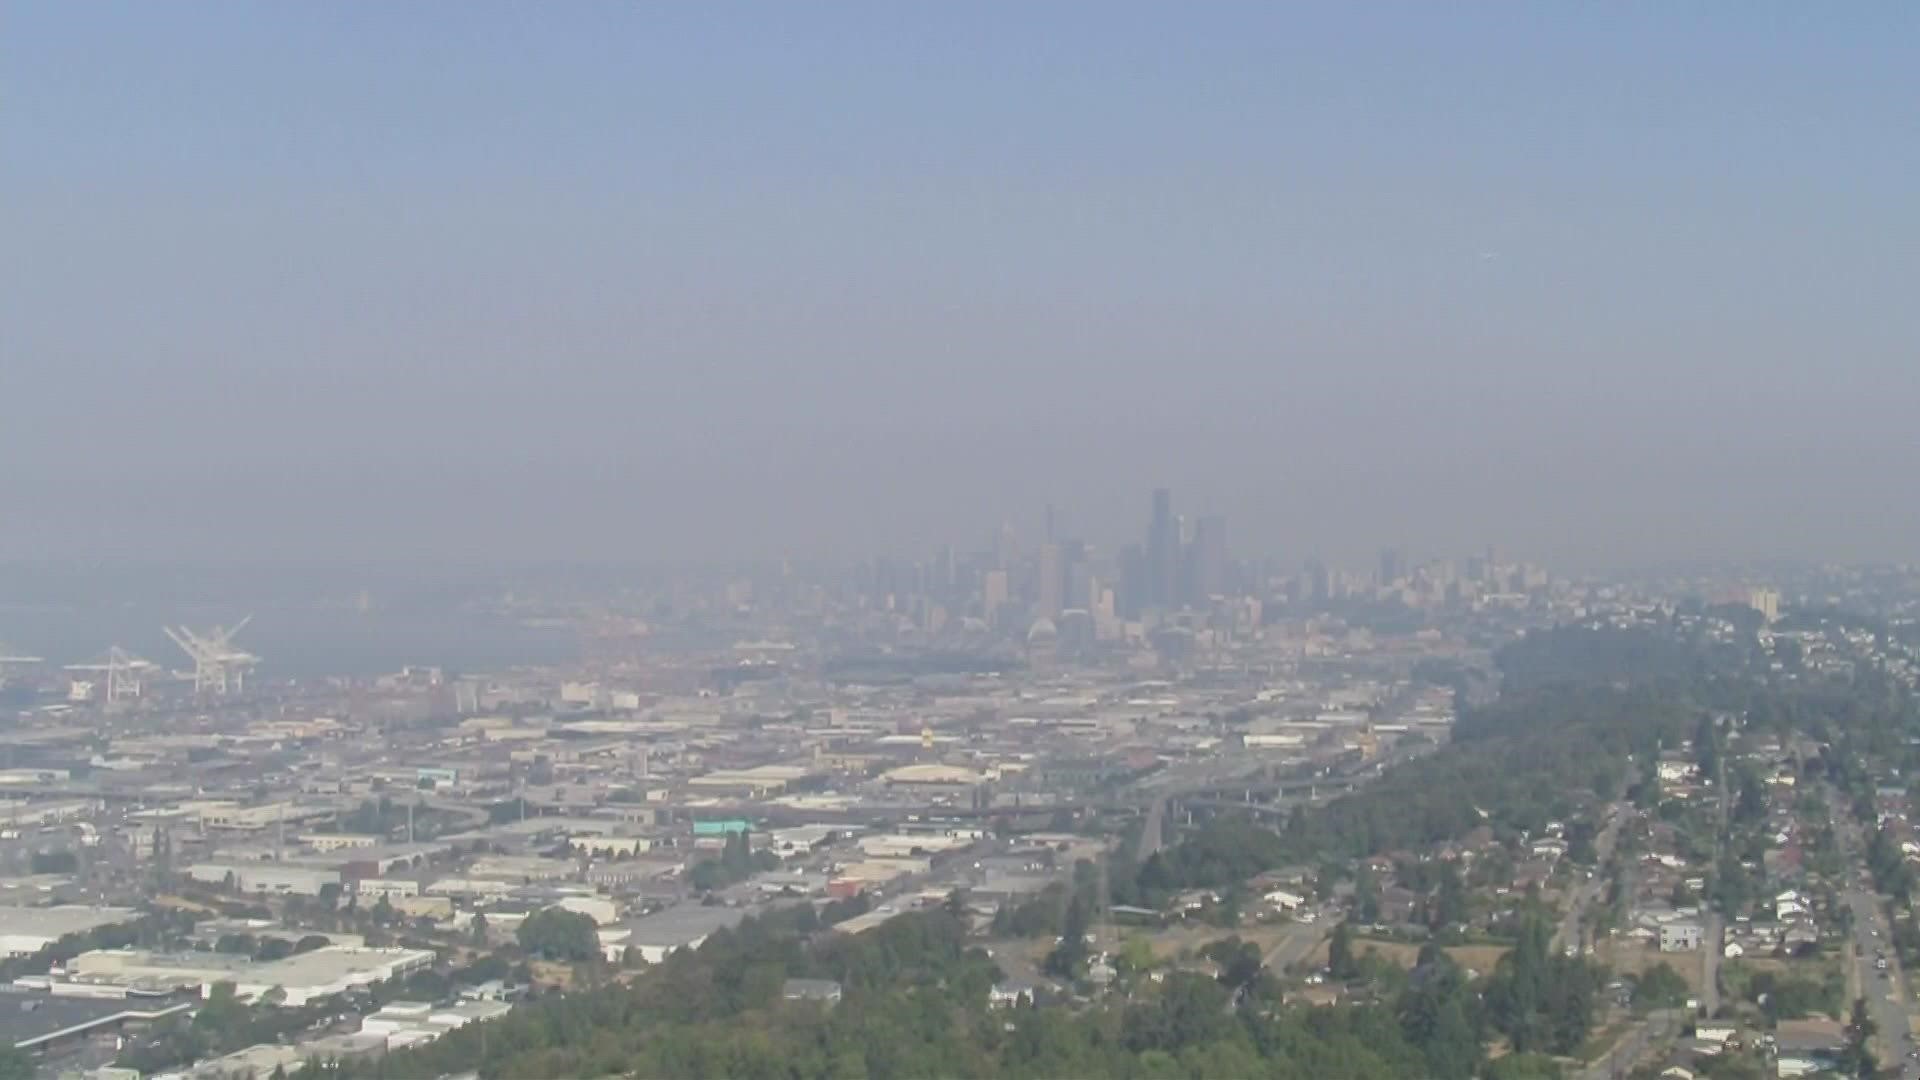 According to Puget Sound Clean Air Agency, the air quality in the area is "very unhealthy" for everyone downtown and in north Seattle on Wednesday afternoon.